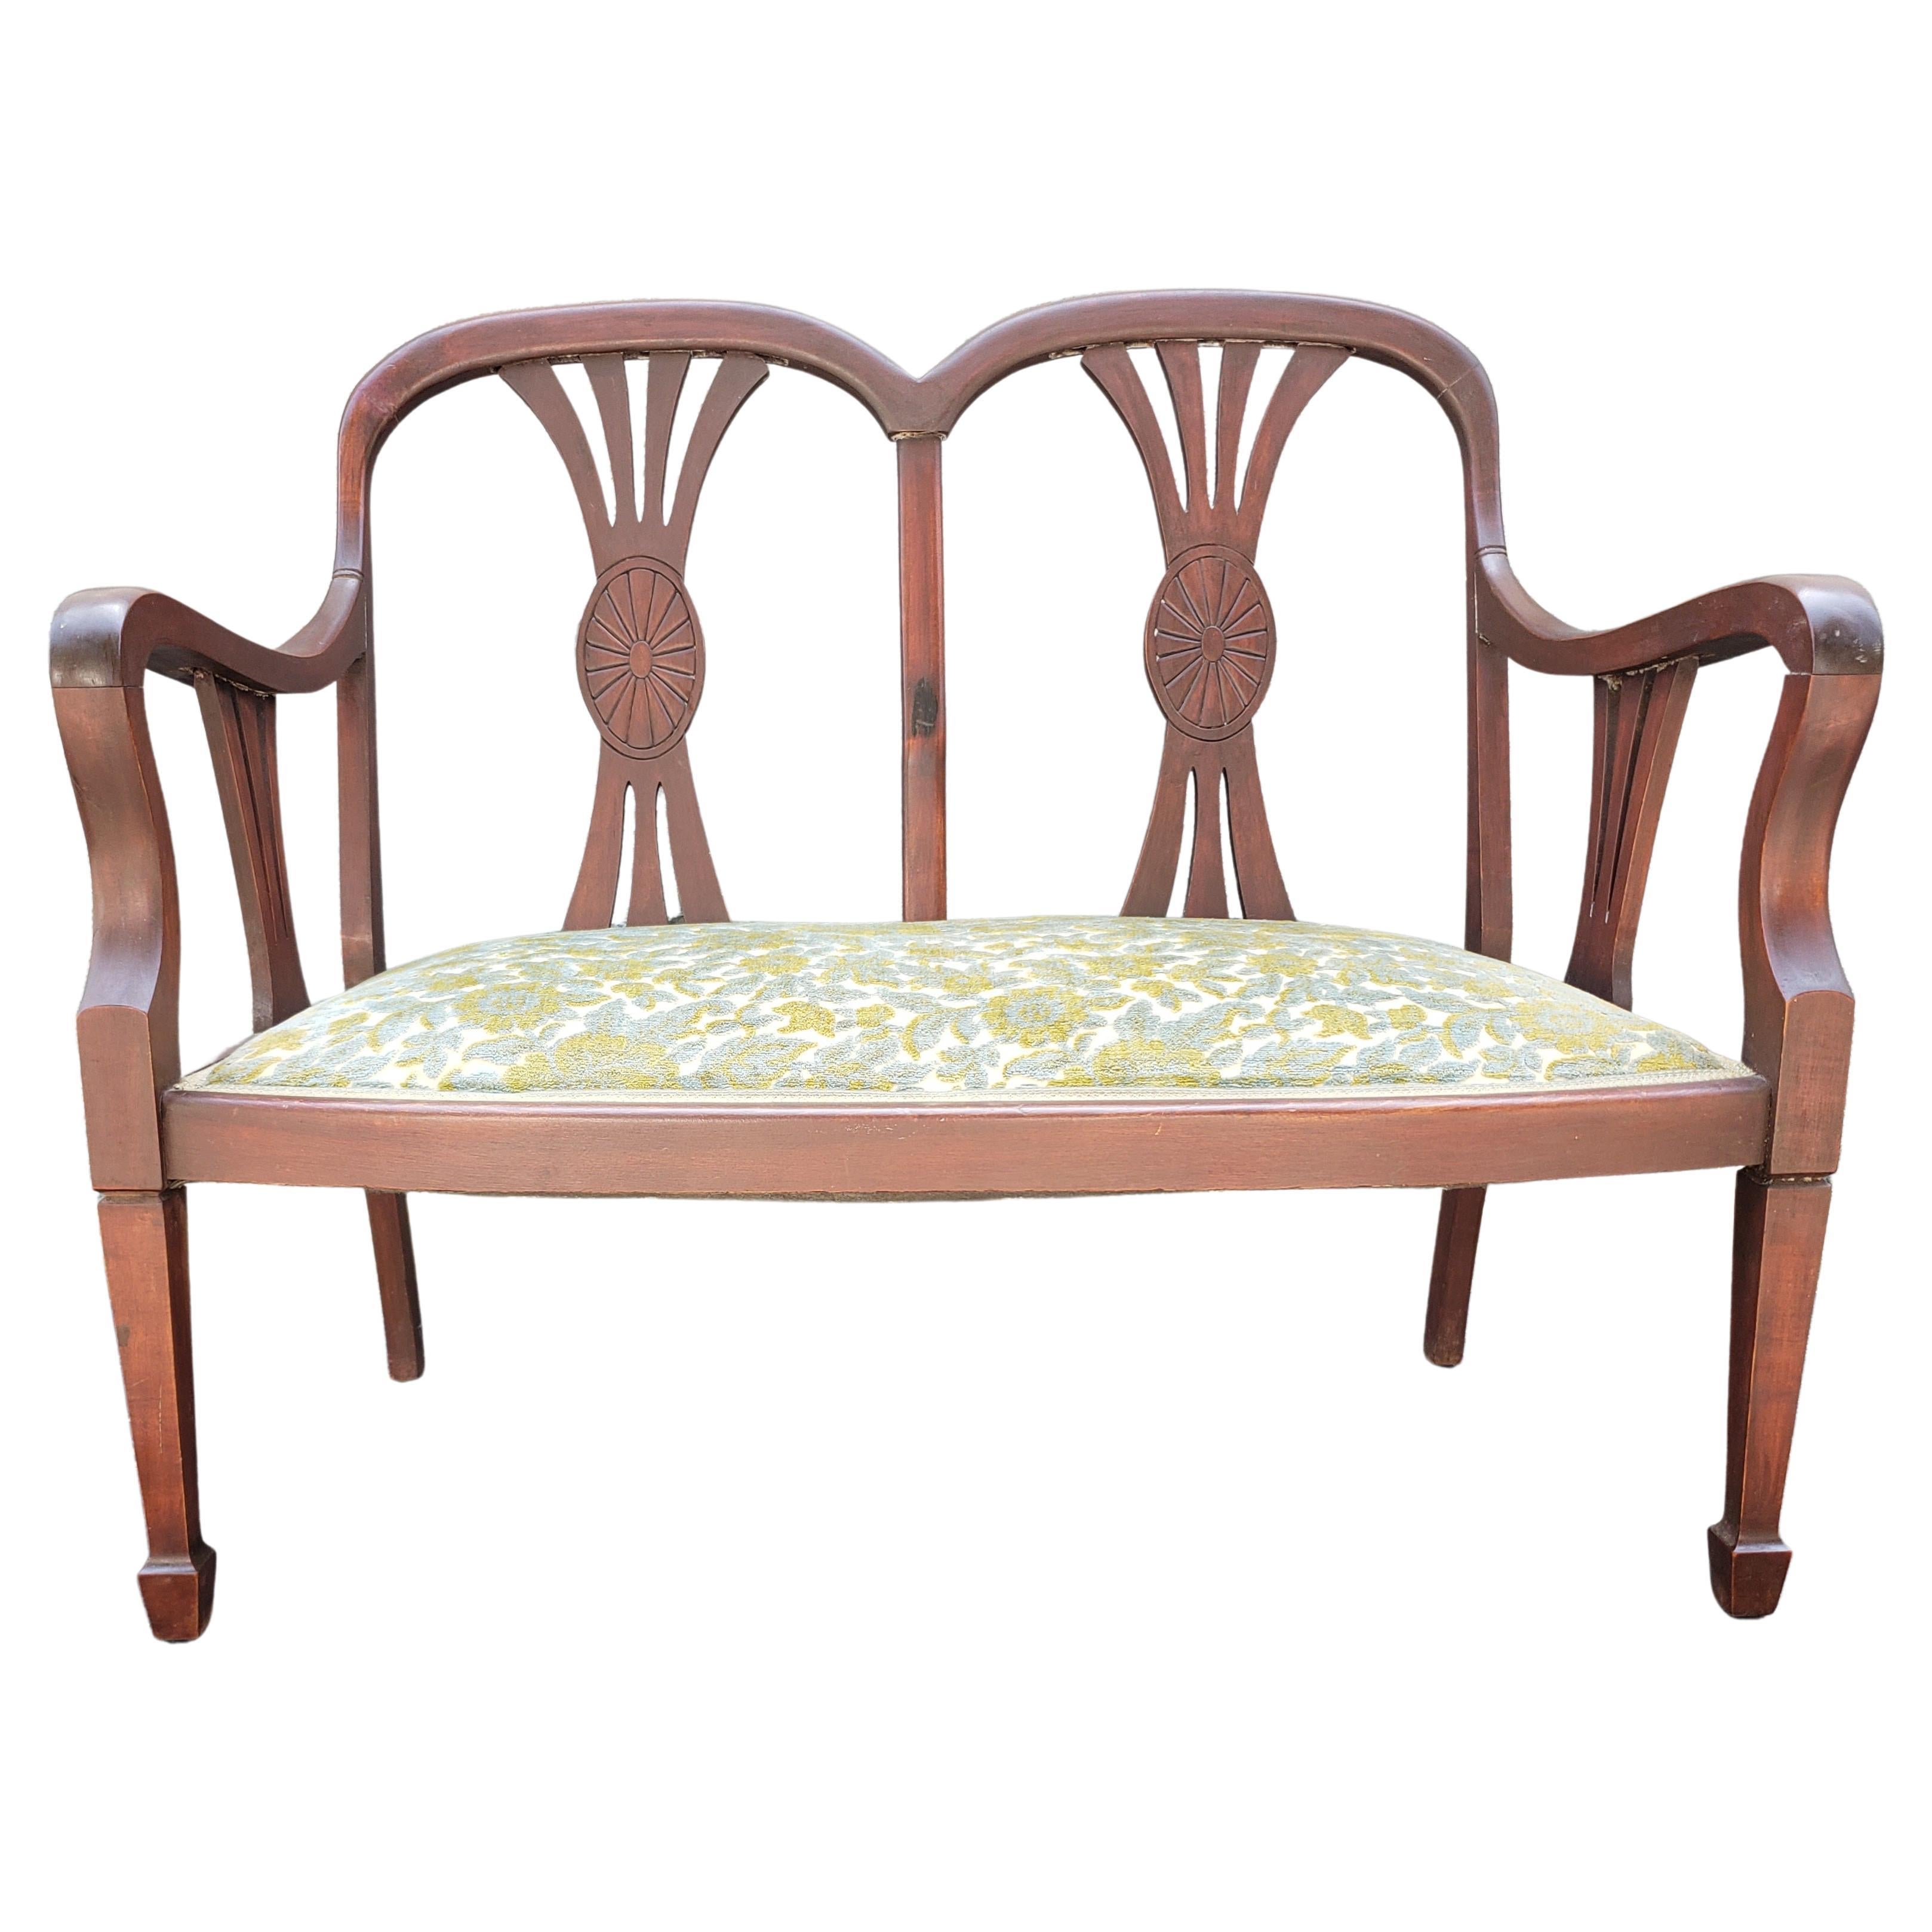 1930s Federal Style Mahogany and Crewel Upholstered Settee For Sale